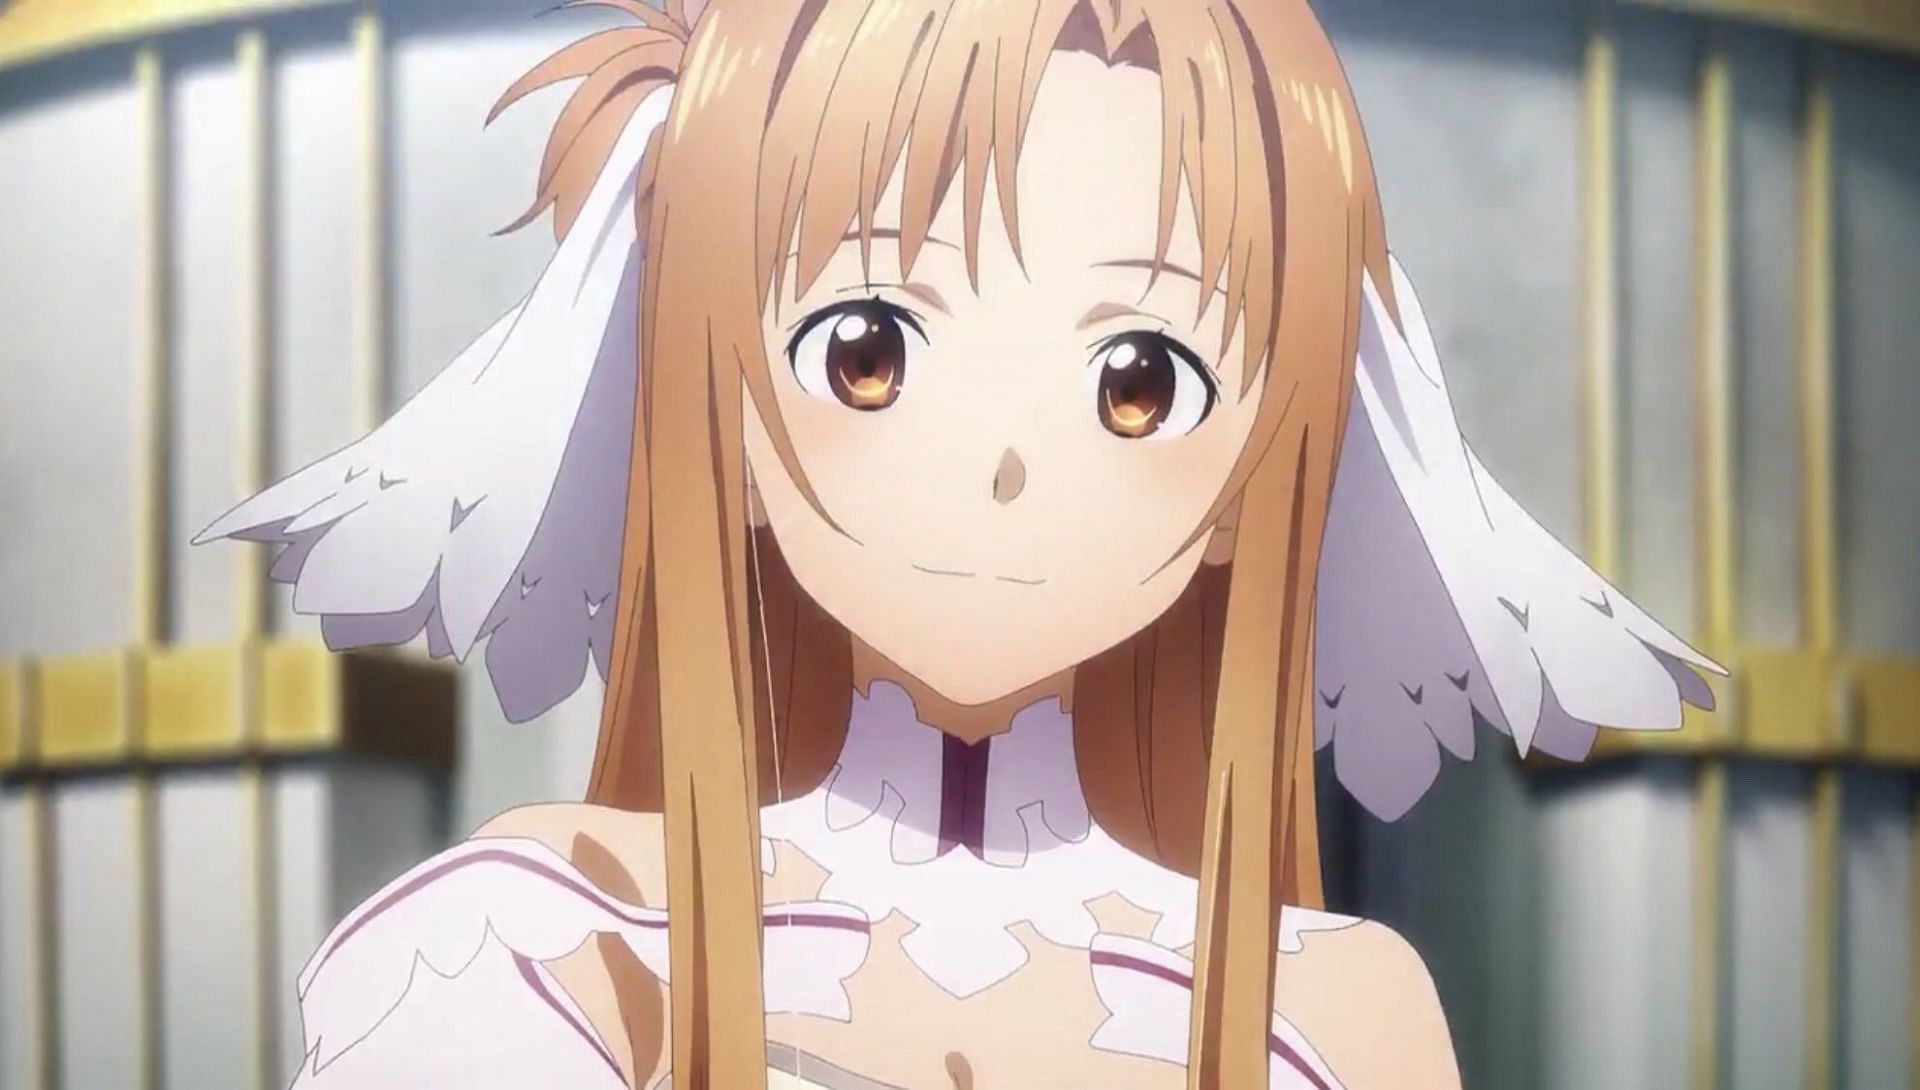 Asuna Yuuki, as seen in the anime Sword Art Online (Image via A-1 Pictures)